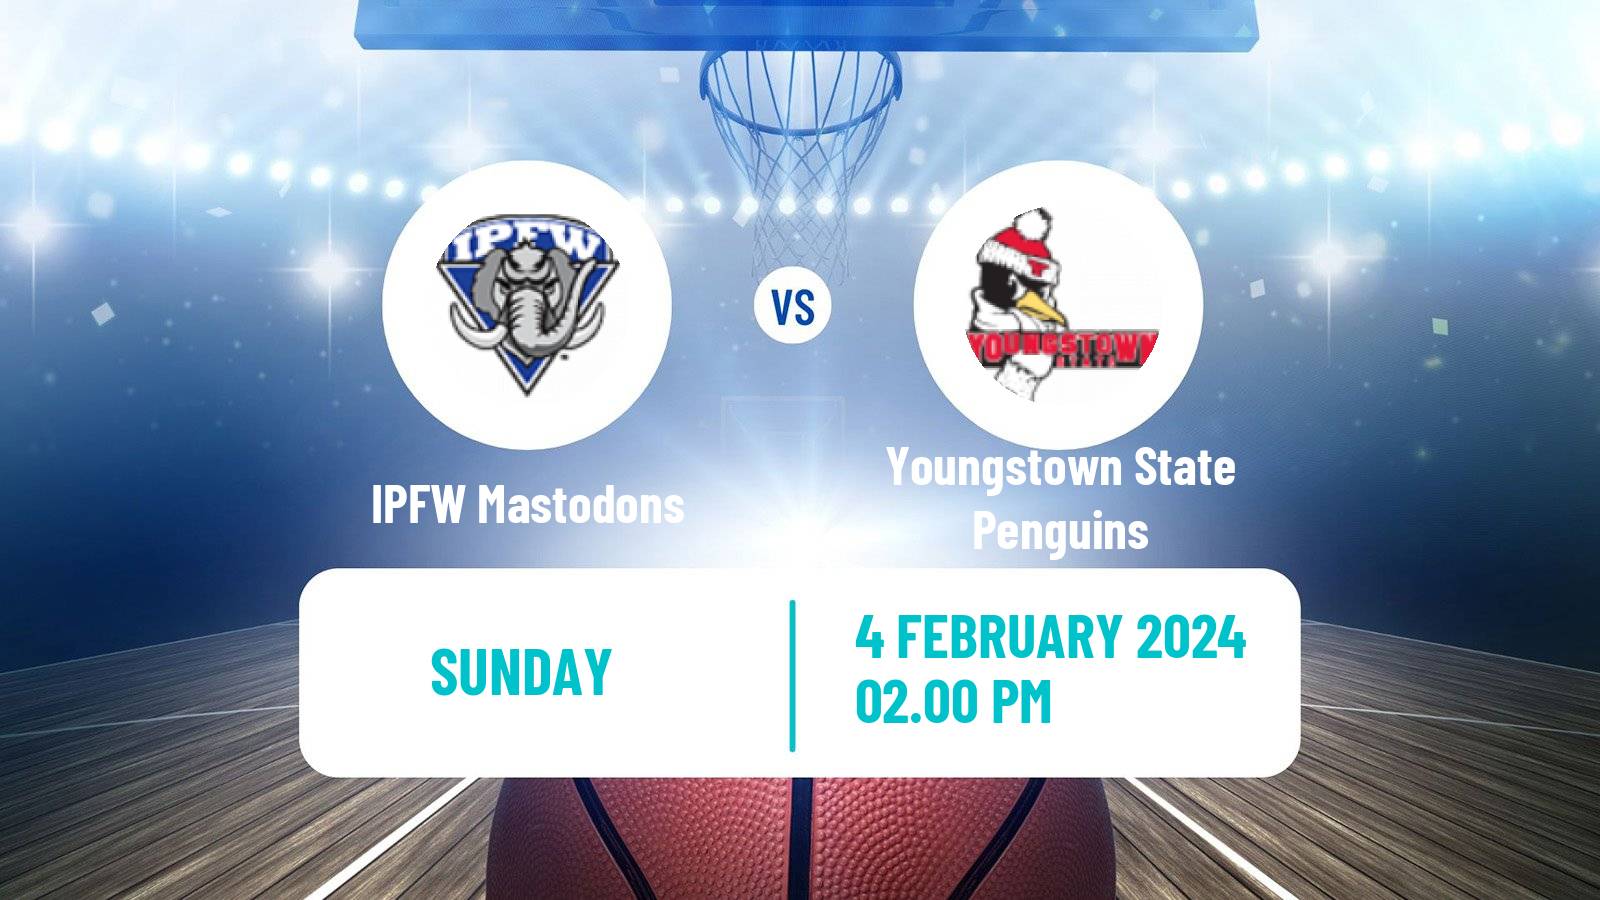 Basketball NCAA College Basketball IPFW Mastodons - Youngstown State Penguins